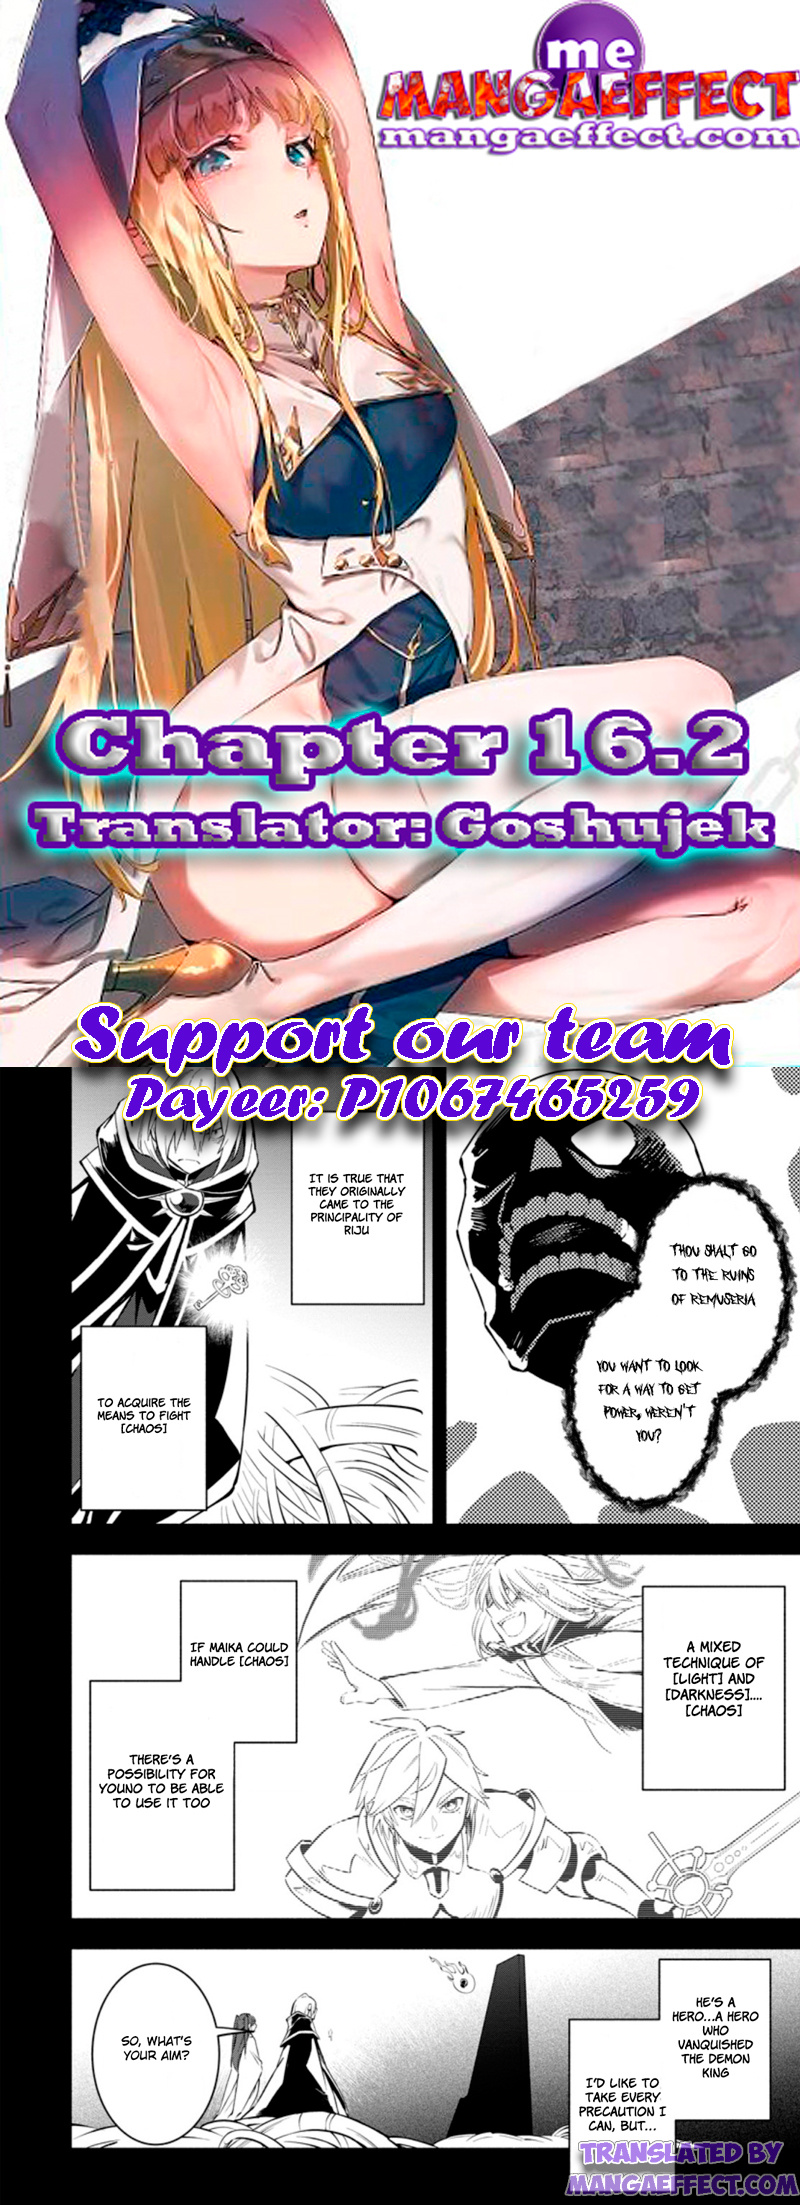 Chapter 16.2